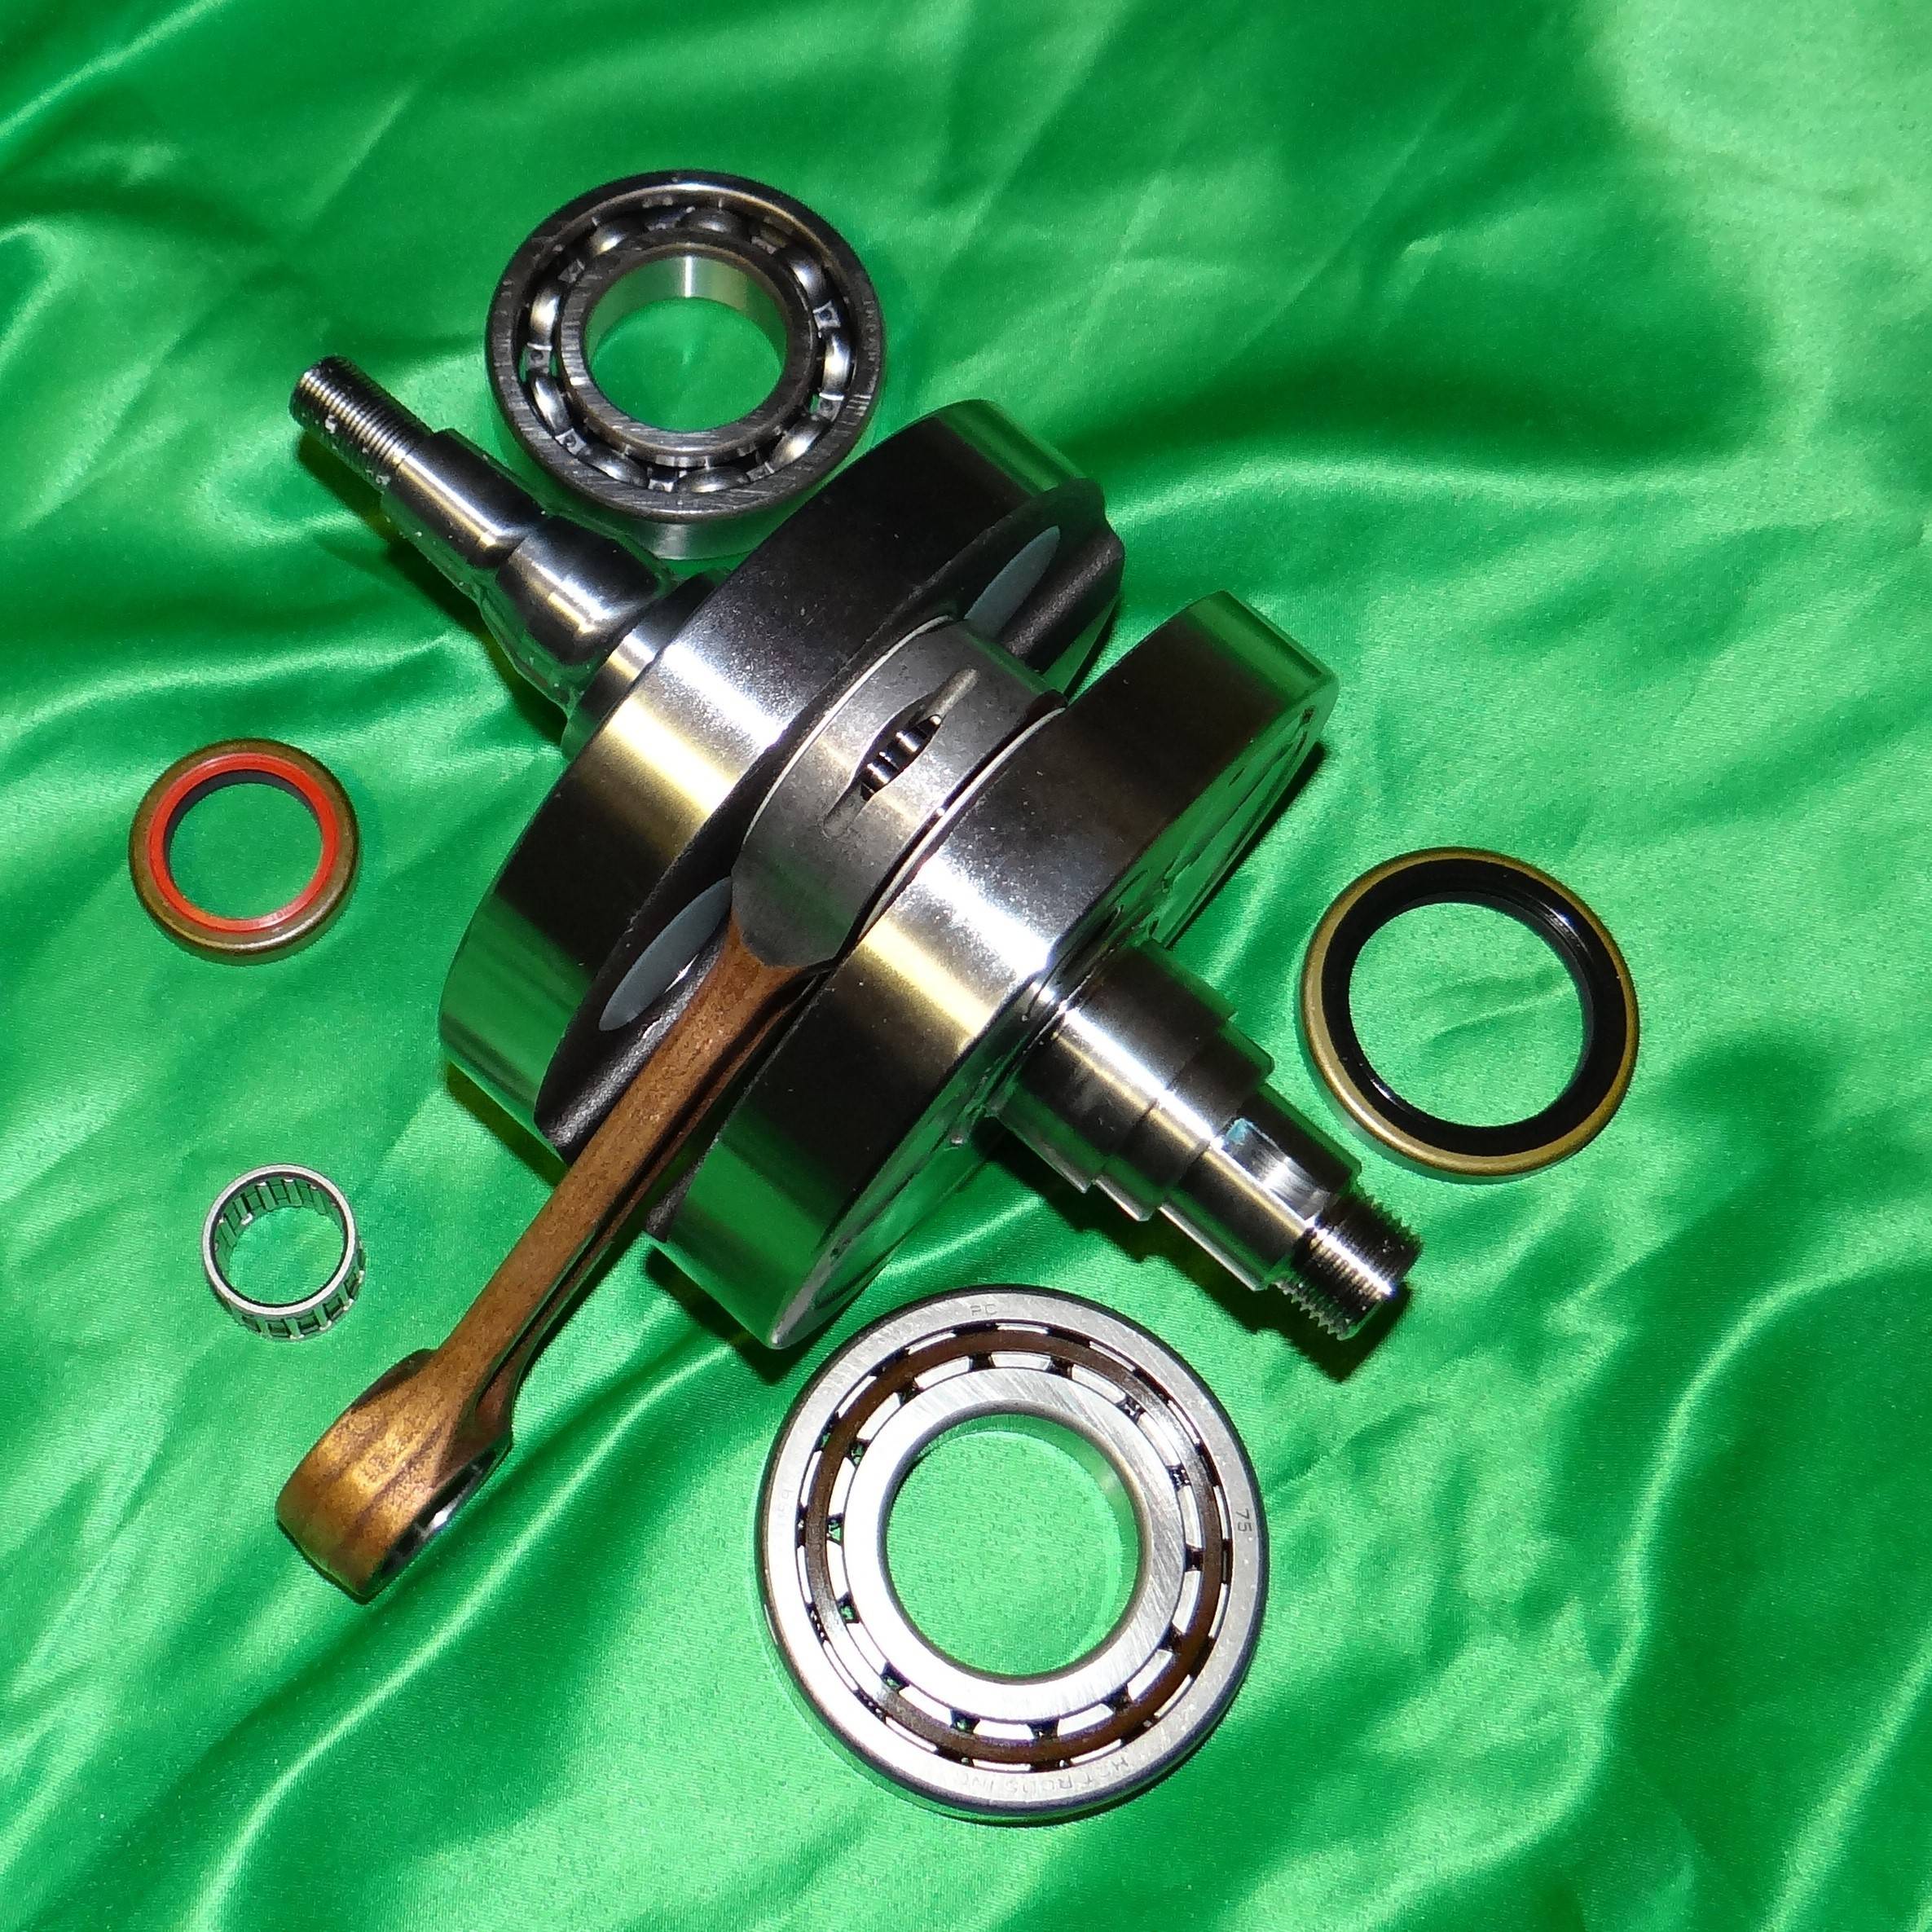 Crankshaft, crankcase, bearing, connecting rod and needle cage for SHERCO 4 stroke